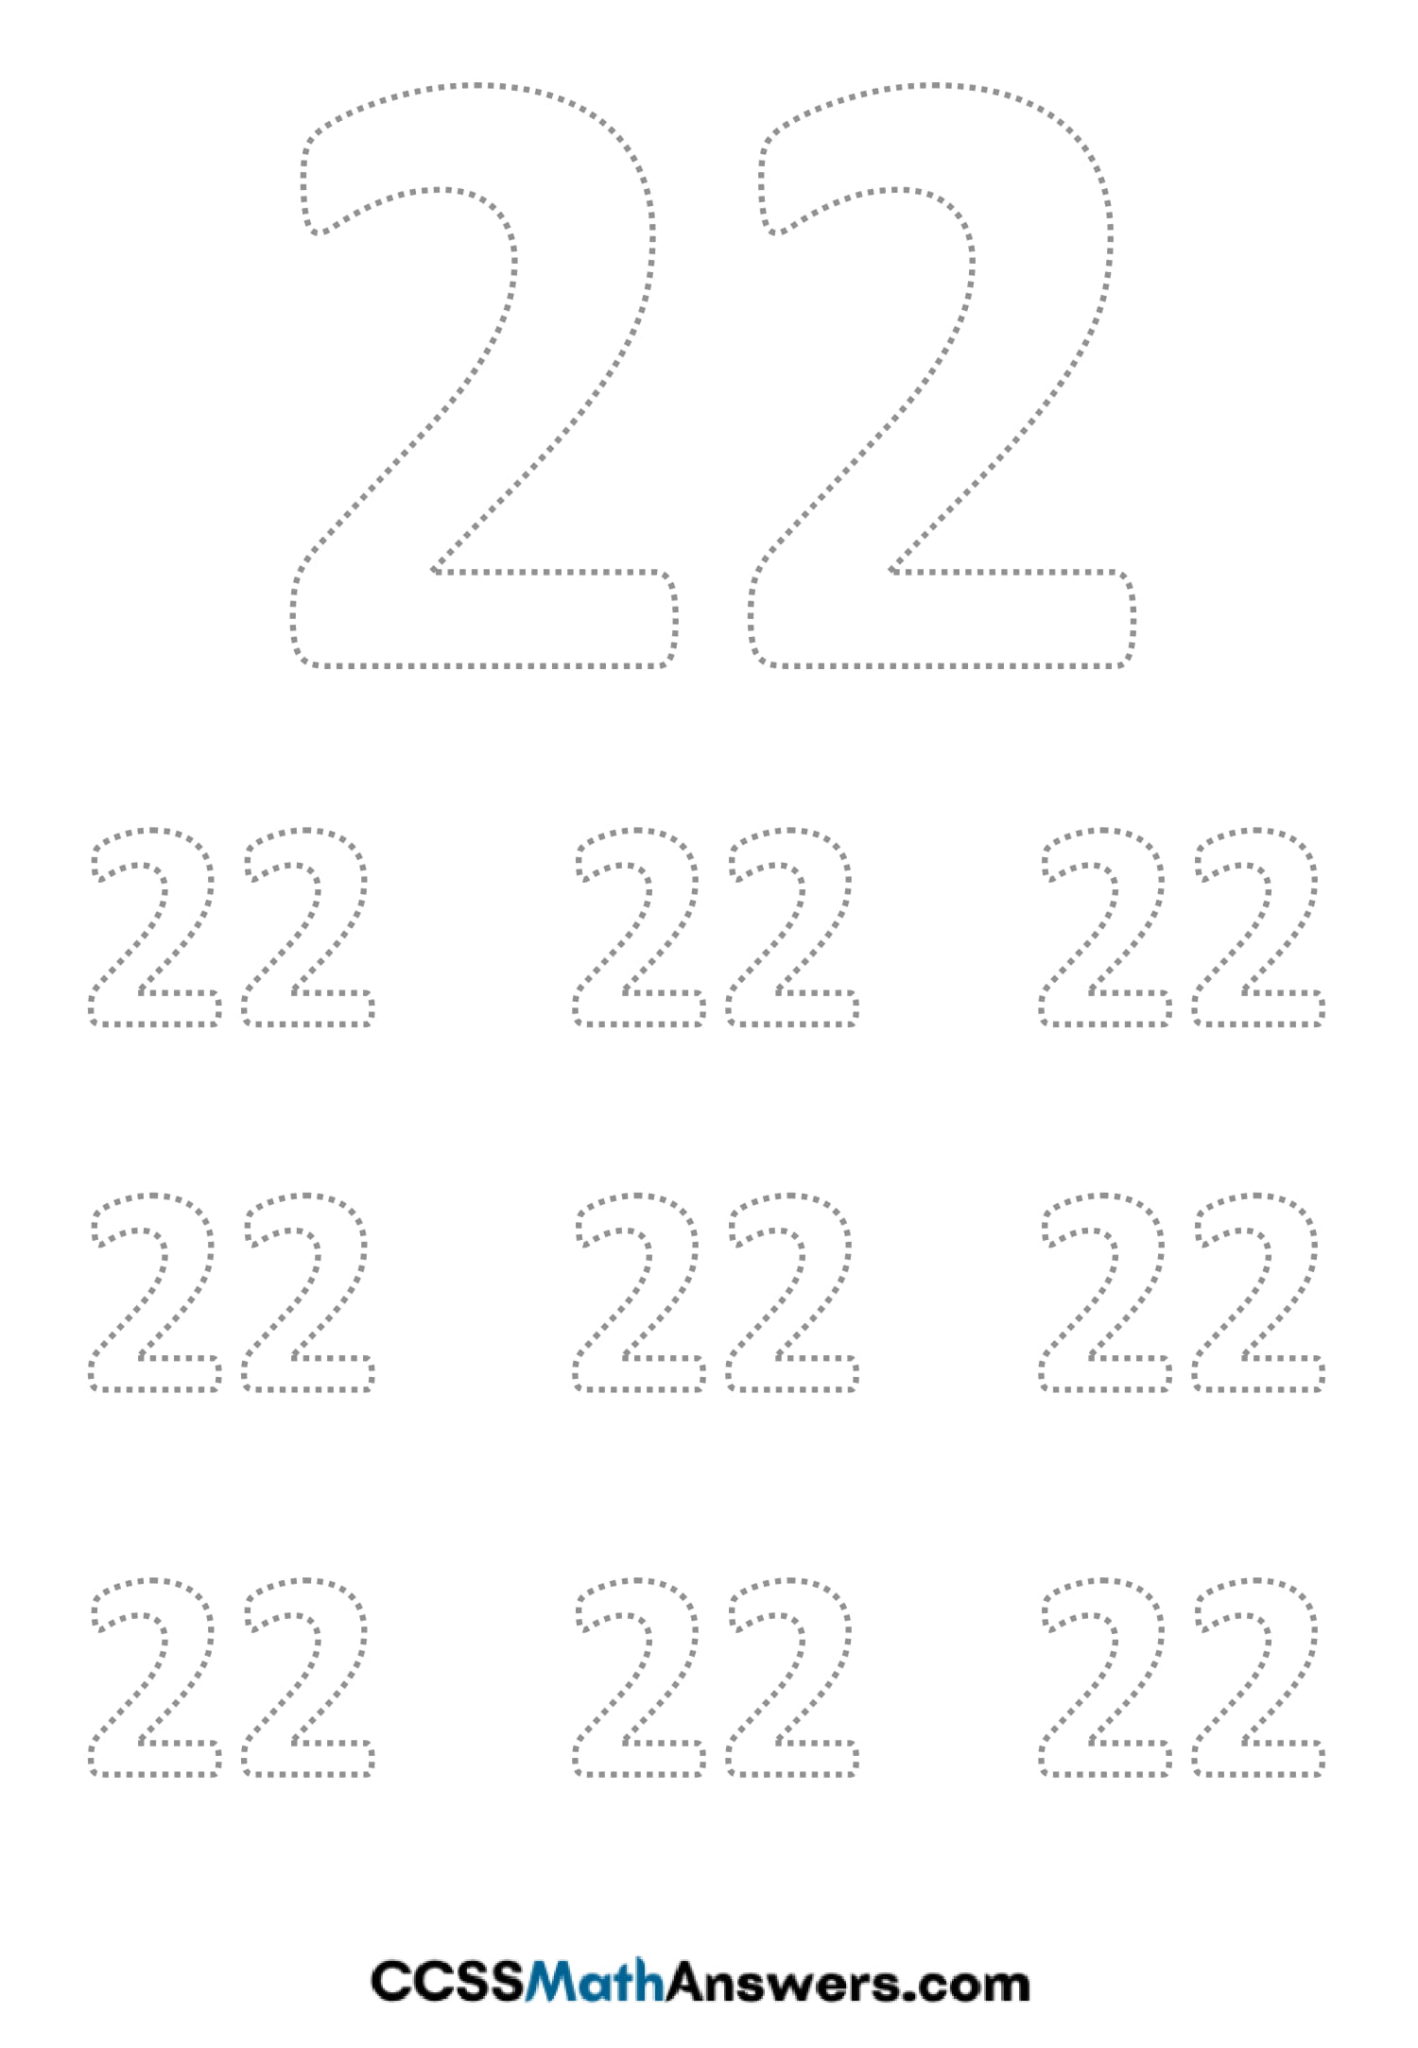 Worksheet On Number 22 Free Printable Number 22 Tracing Counting Activity Worksheets For 